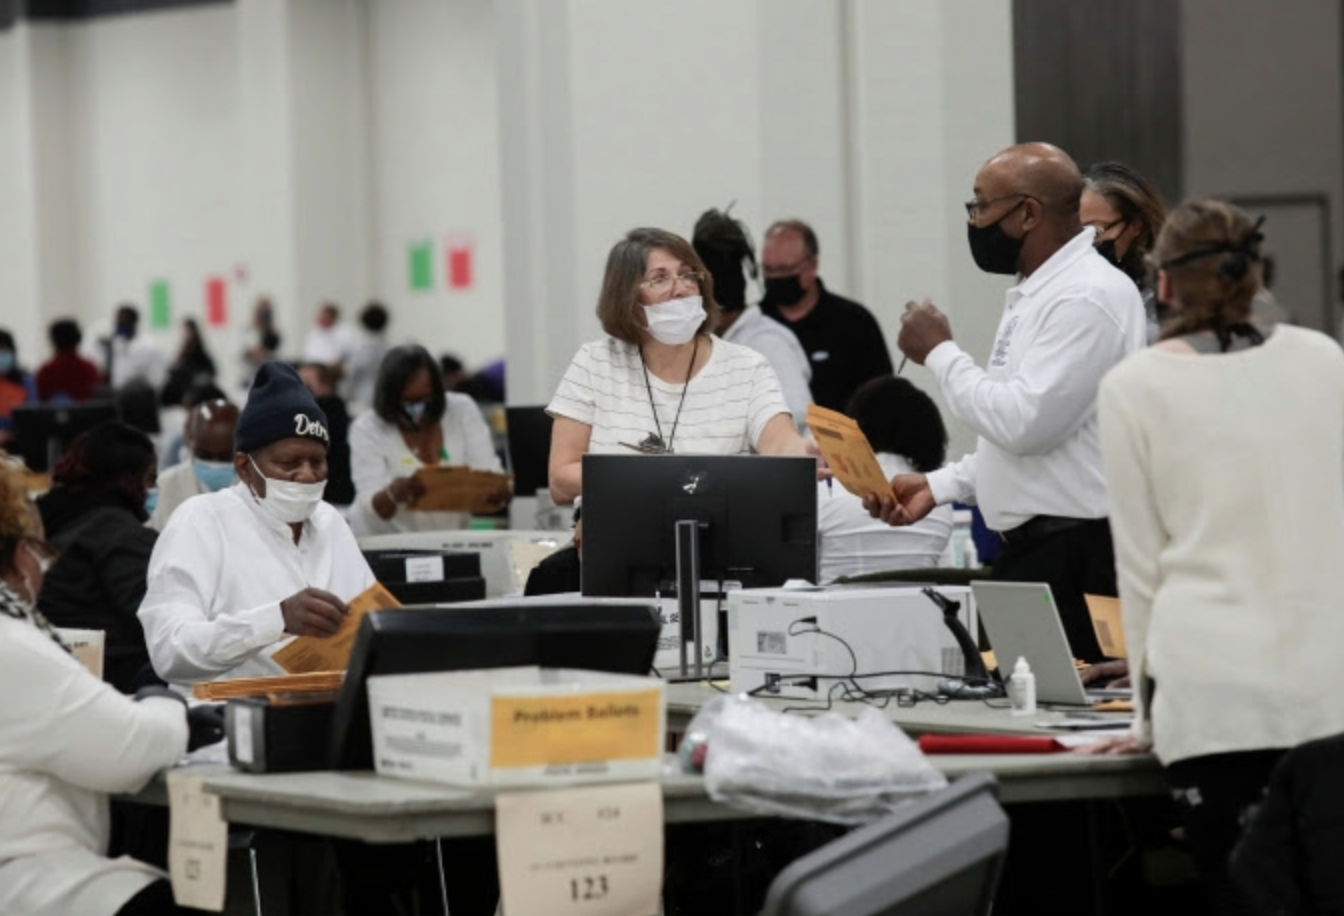 Poll workers - TCF Center in Detroit, MI